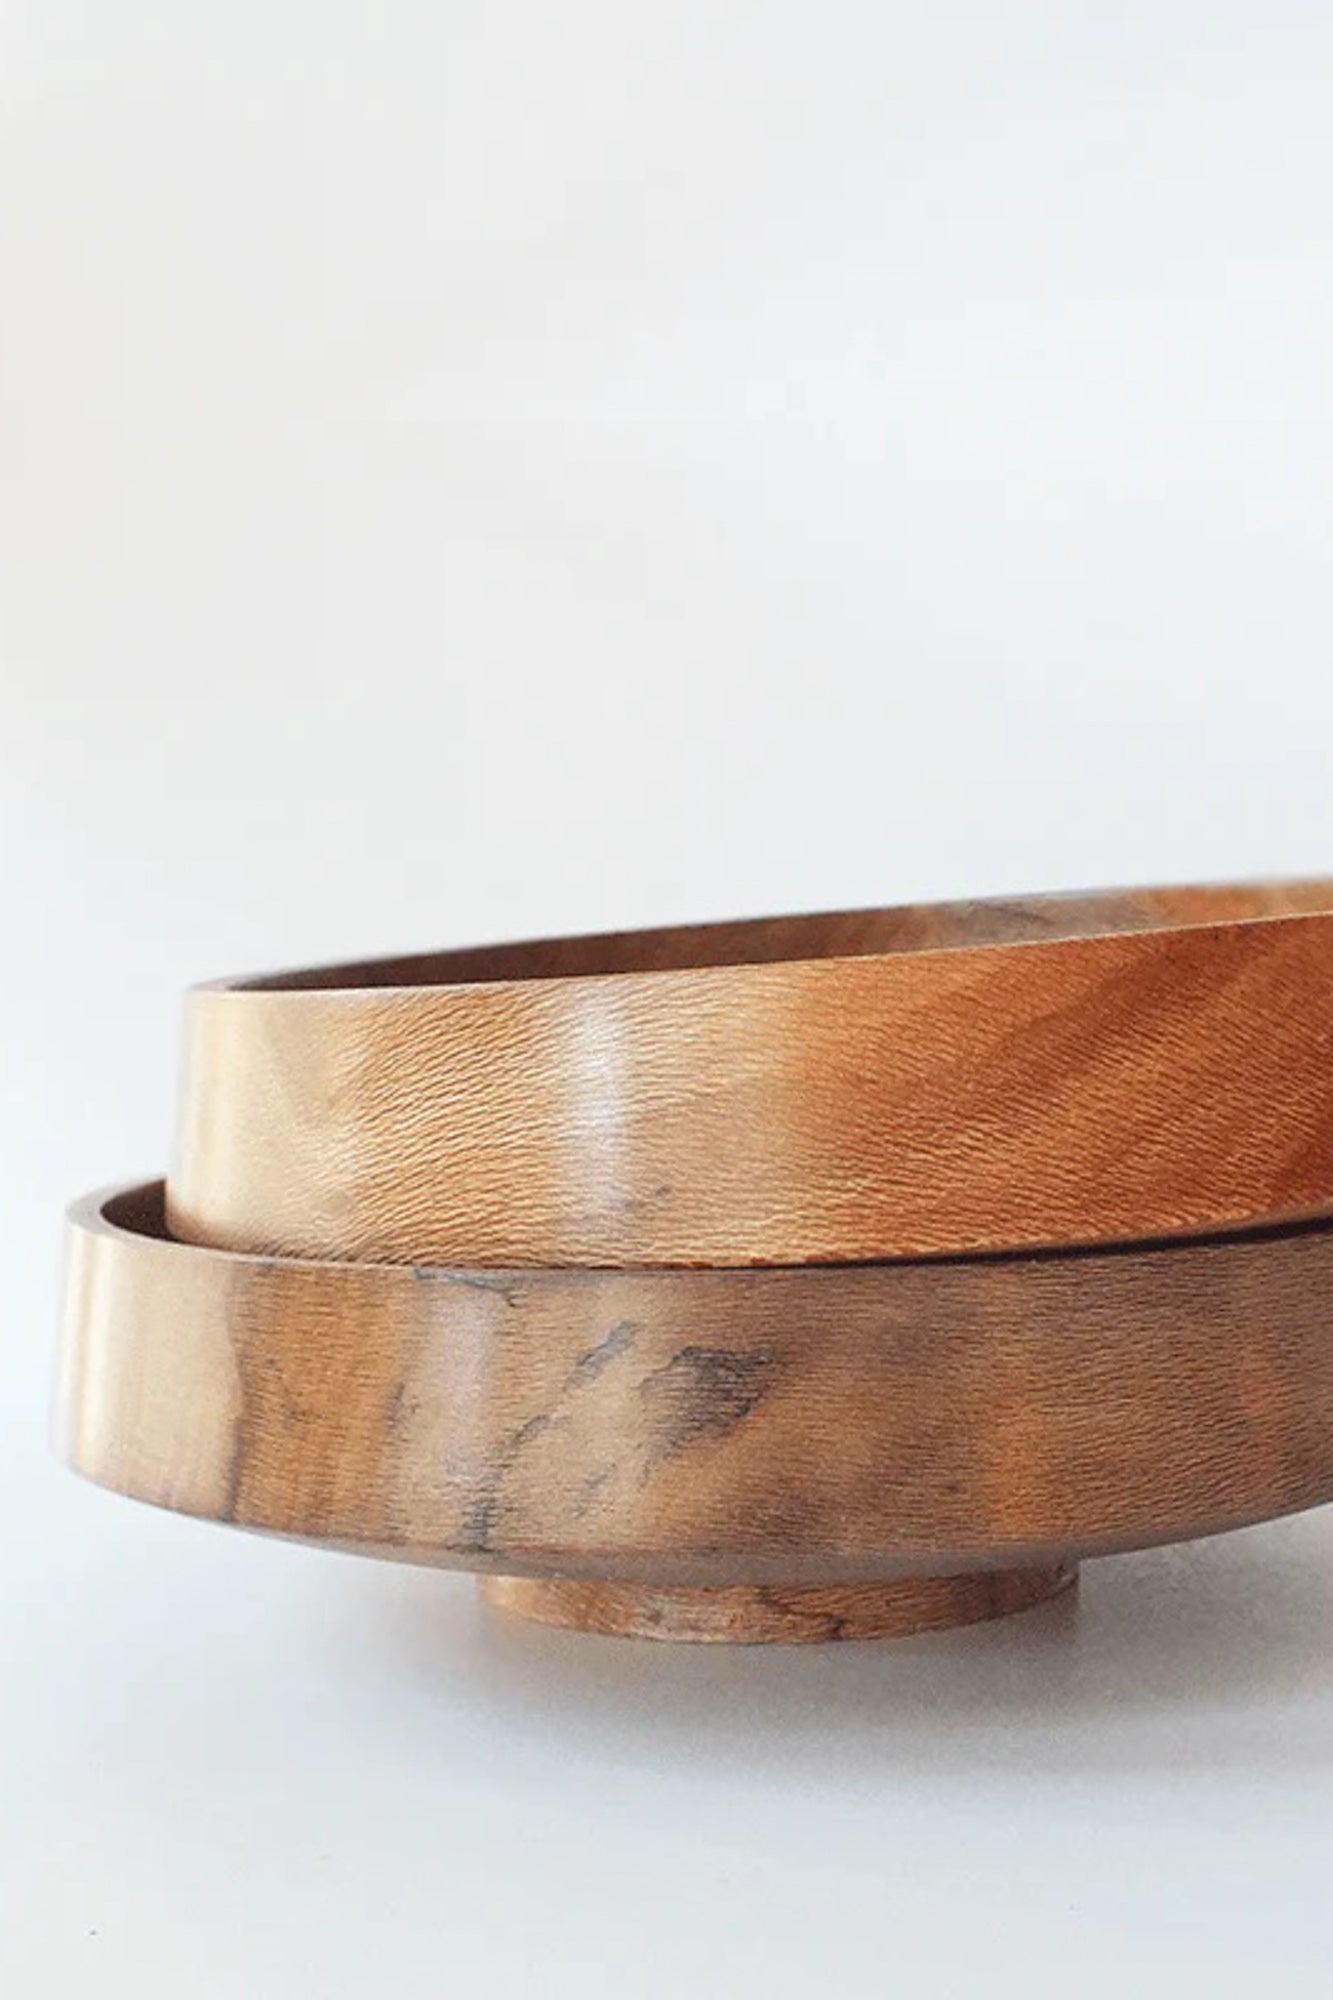 Two bowls of Het Houtlokaal stacked, highlighting its craftsmanship and the natural beauty of sustainably sourced sycamore wood. Handmade in Rotterdam, it embodies the artistry and storytelling of Marisa Klaster, a local woodworker.